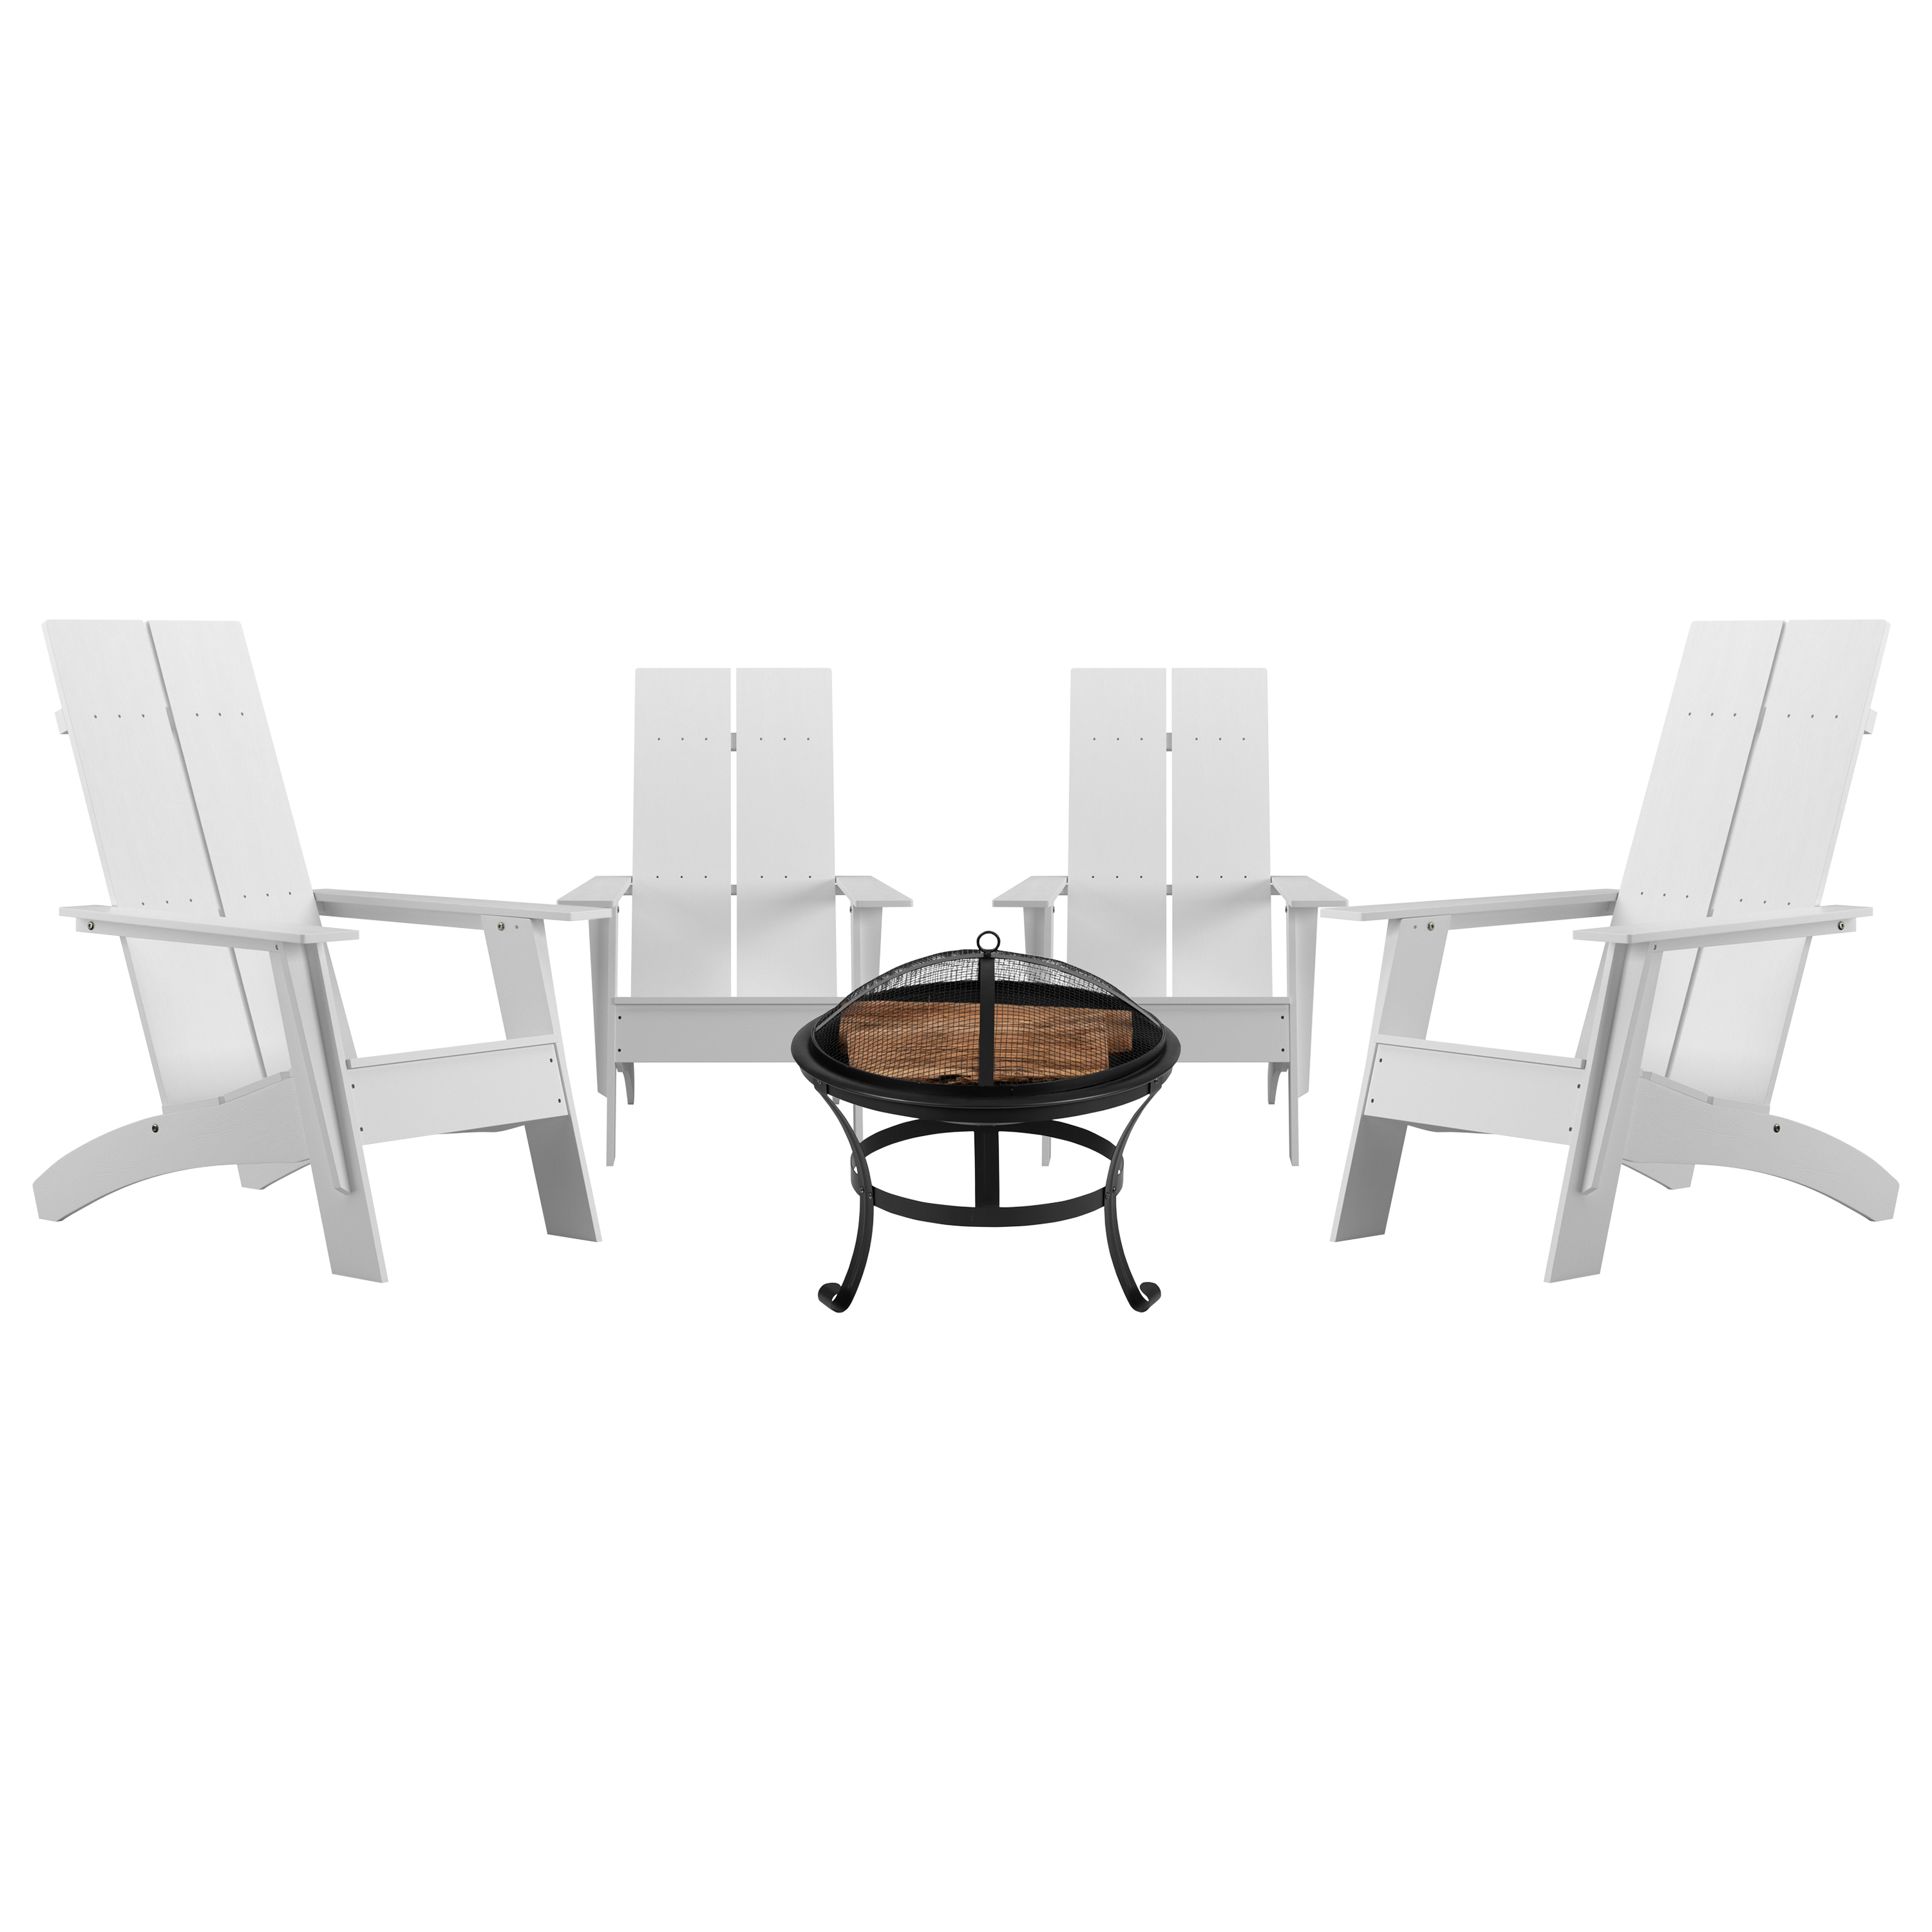 Flash Furniture Finn 5 Pcs Fire Pit with Adirondack Rocking Chairs, White - image 1 of 15